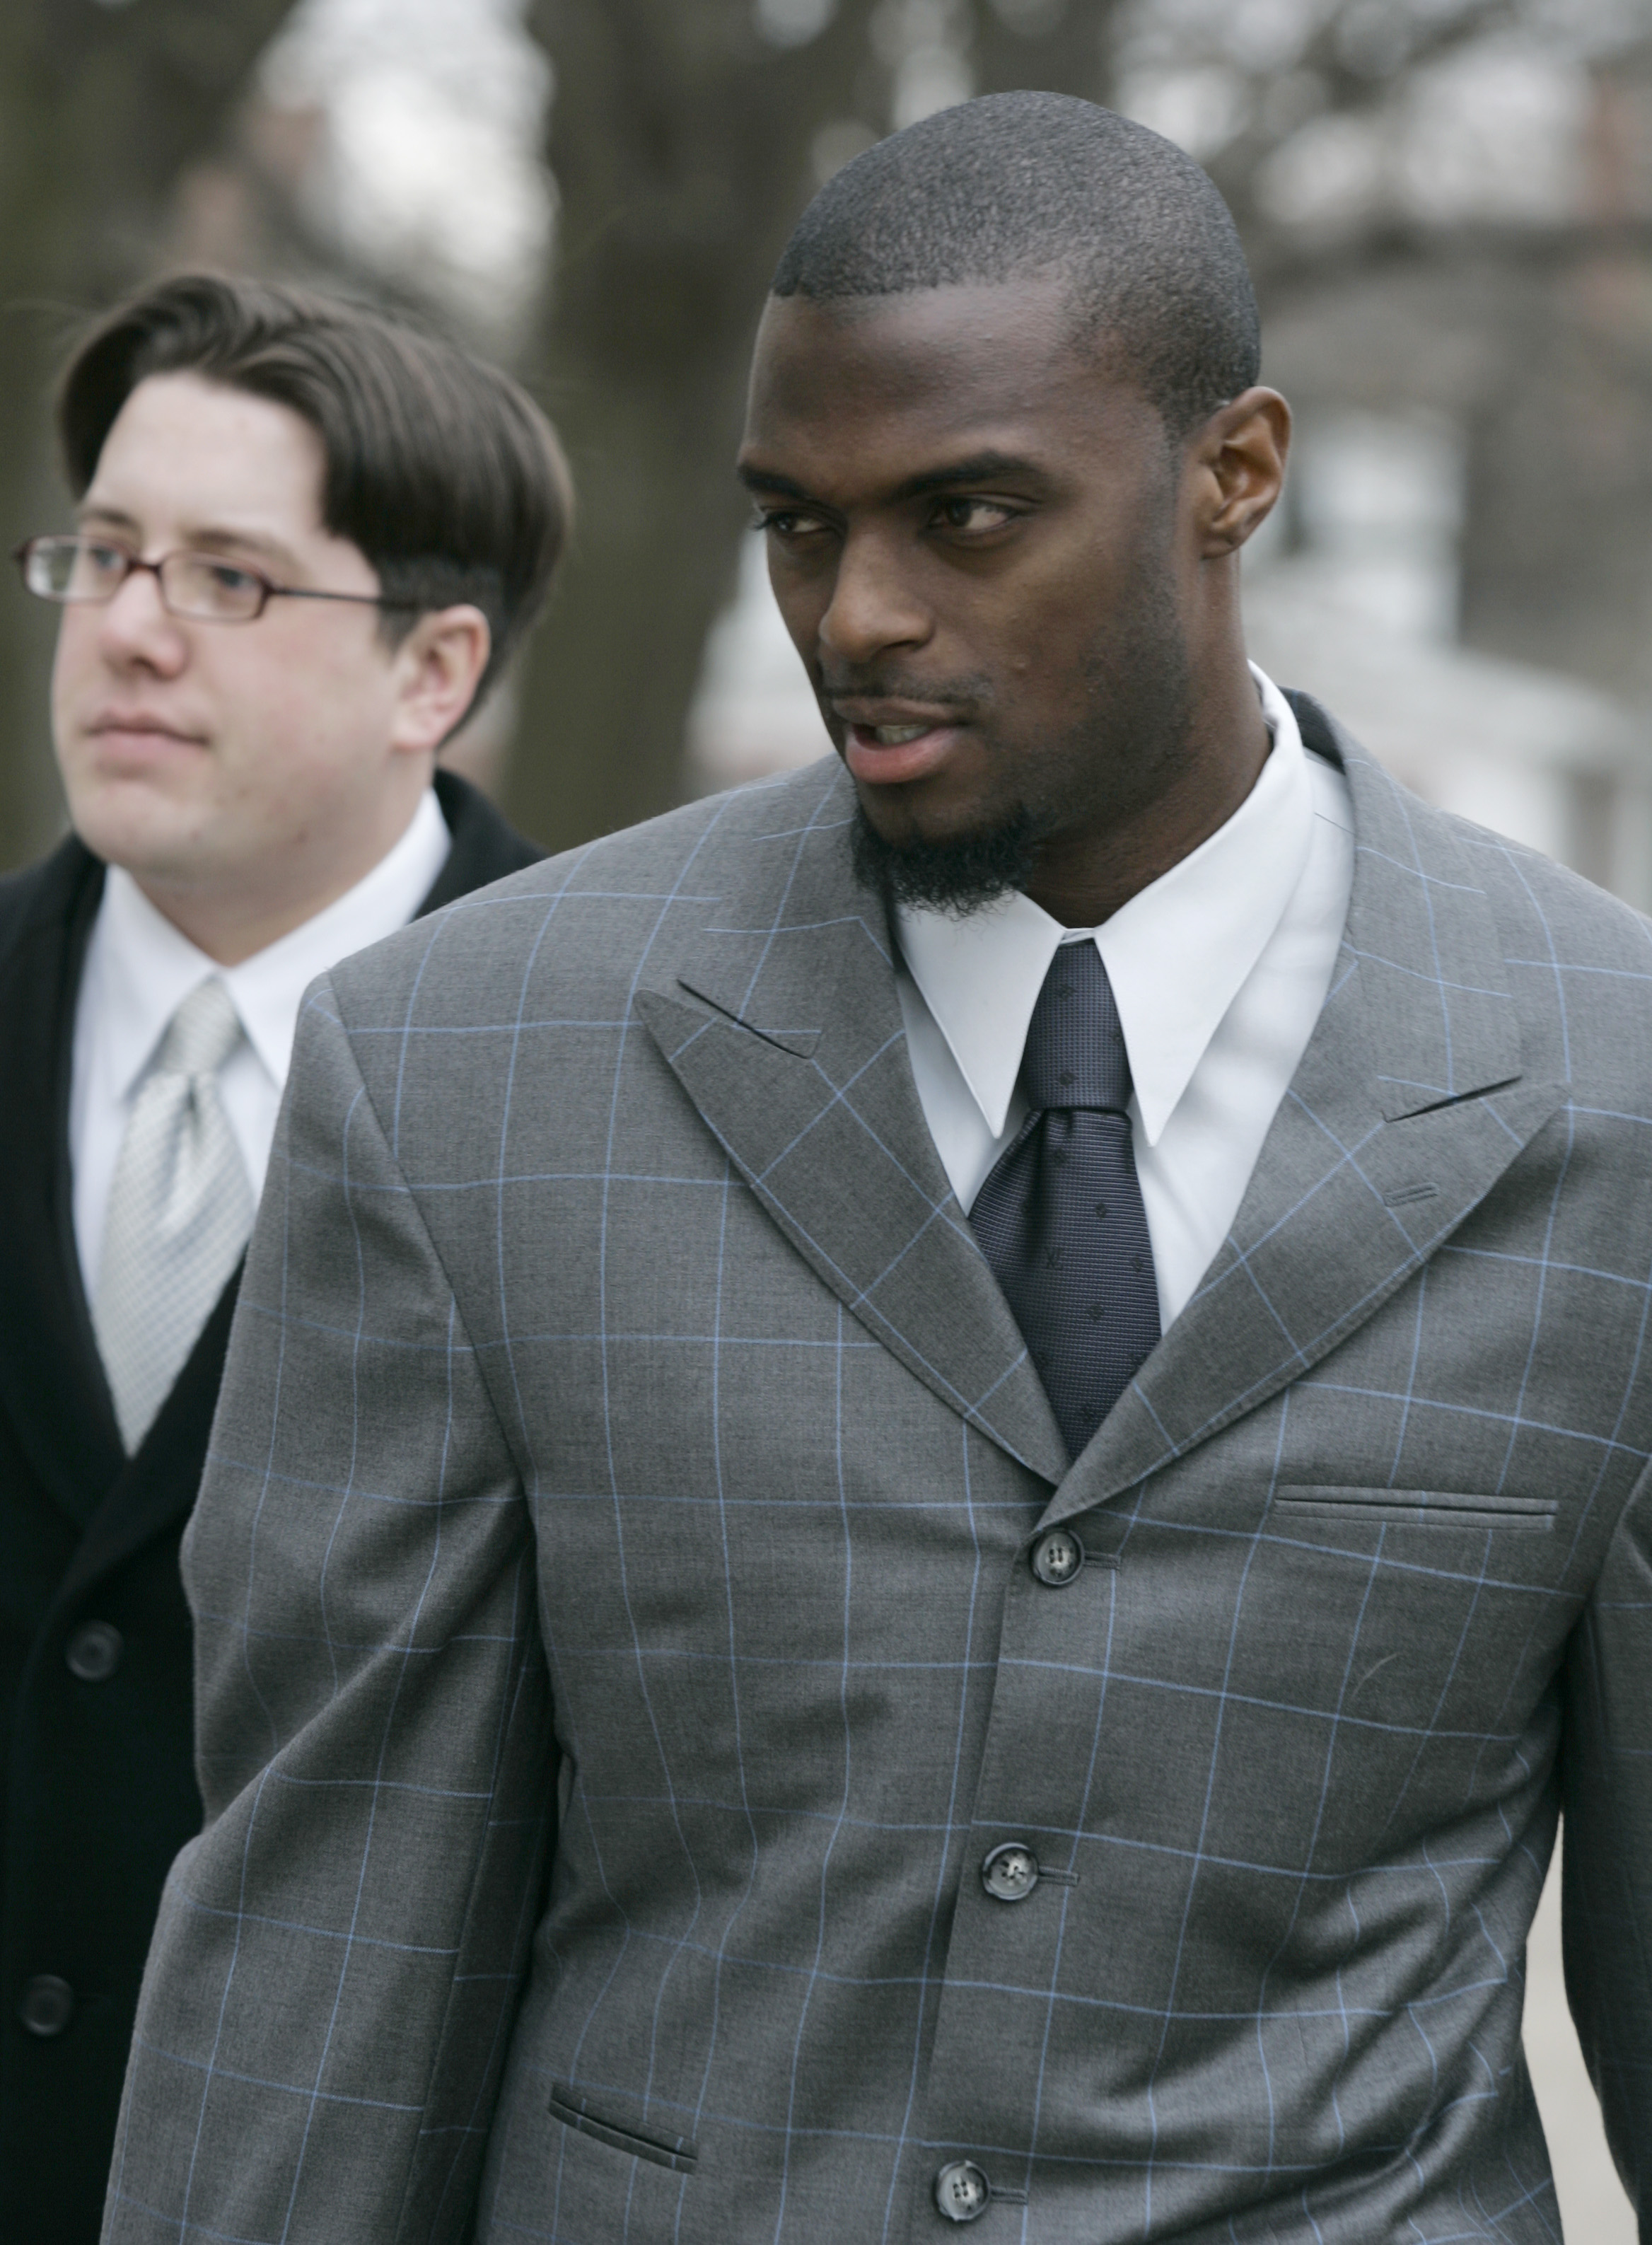 LEBANON - JANUARY 14: New York Giants wide receiver Plaxico Burress arrives at the Lebanon County Courthouse January 14, 2009 in Lebanon, Pa.  Burress is scheduled to appear in a civil trial in a dispute with an automobile dealer over what he owes in dama